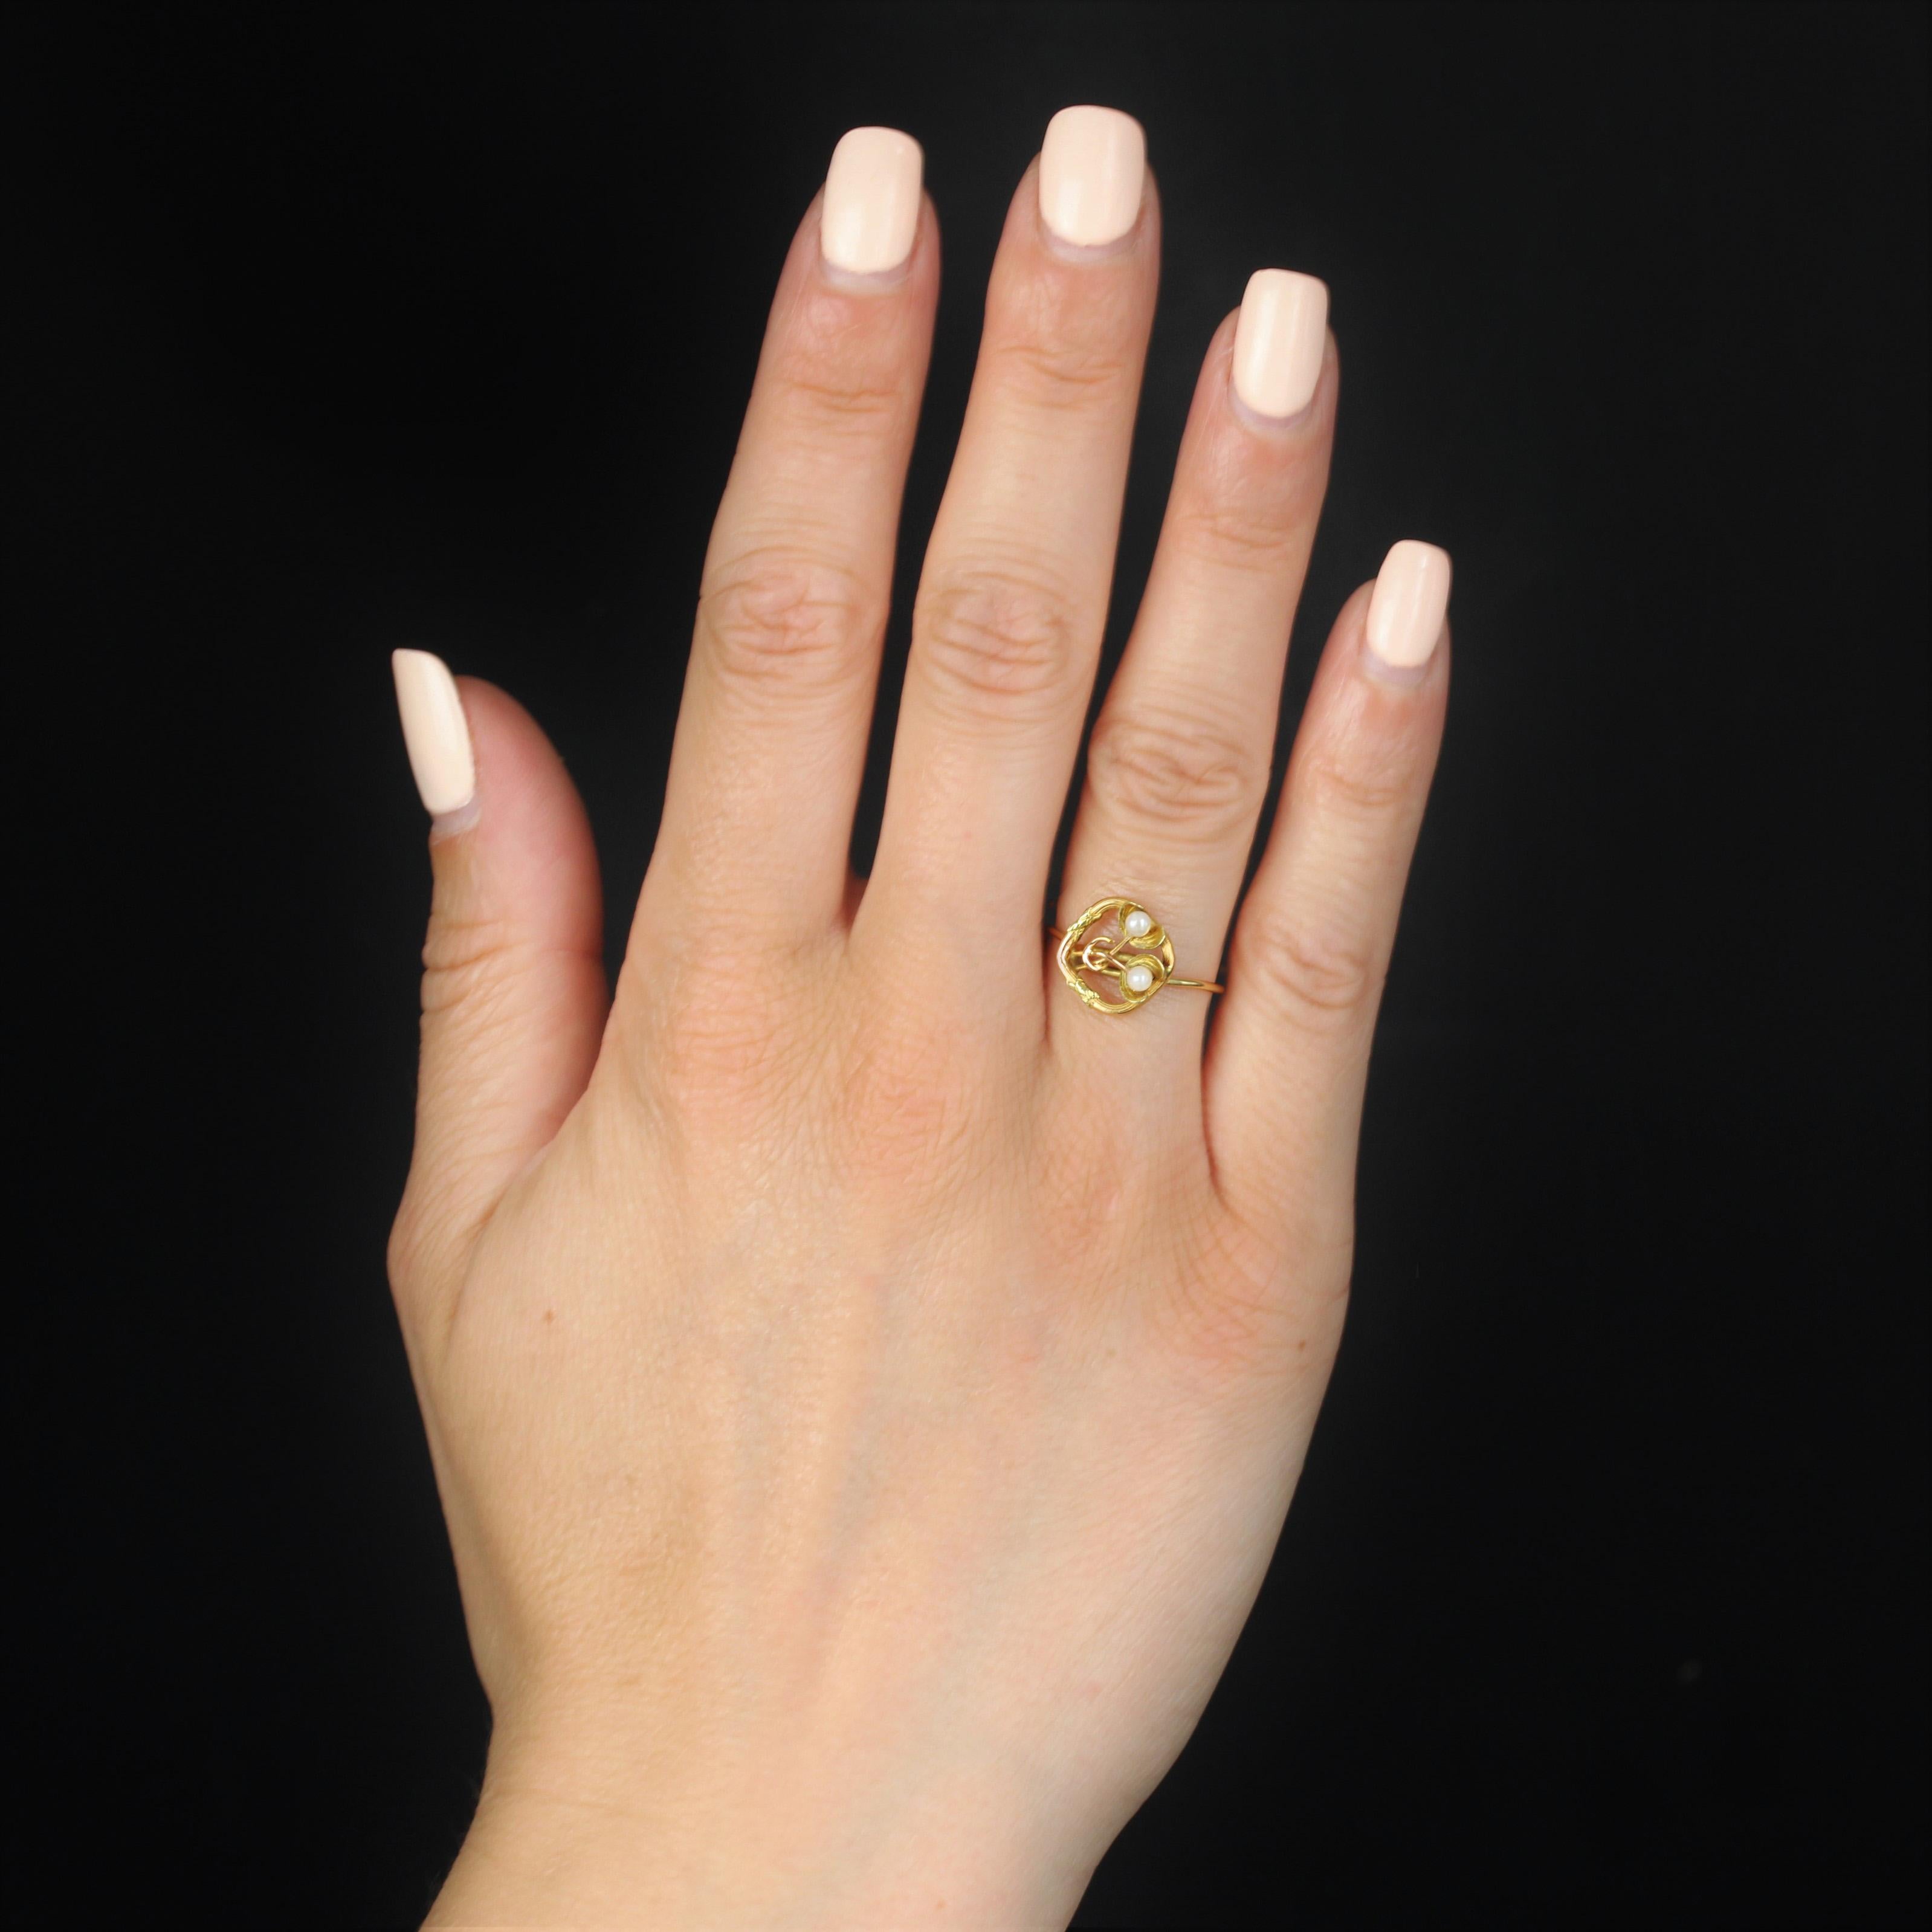 Ring in 18 karat yellow and rose gold.
This elegant antique ring is made of rose gold wire forming an openwork lozenge, the center of which is adorned with 2 flowers with yellow gold leaves, and the center set with a small fine pearl. Two cross